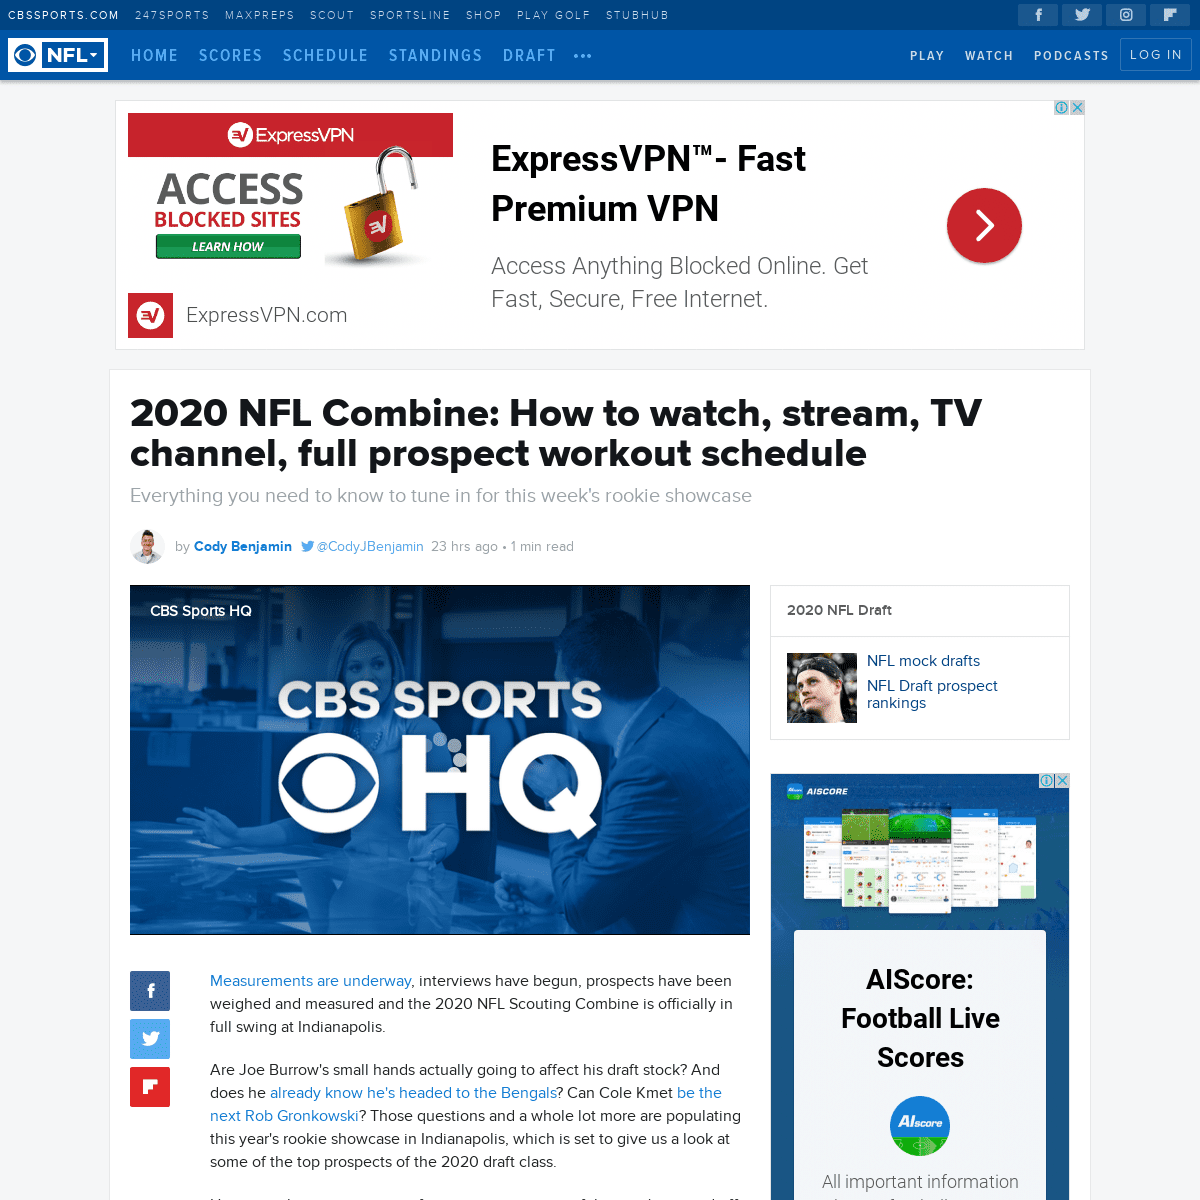 A complete backup of www.cbssports.com/nfl/news/2020-nfl-combine-how-to-watch-stream-tv-channel-full-prospect-workout-schedule/